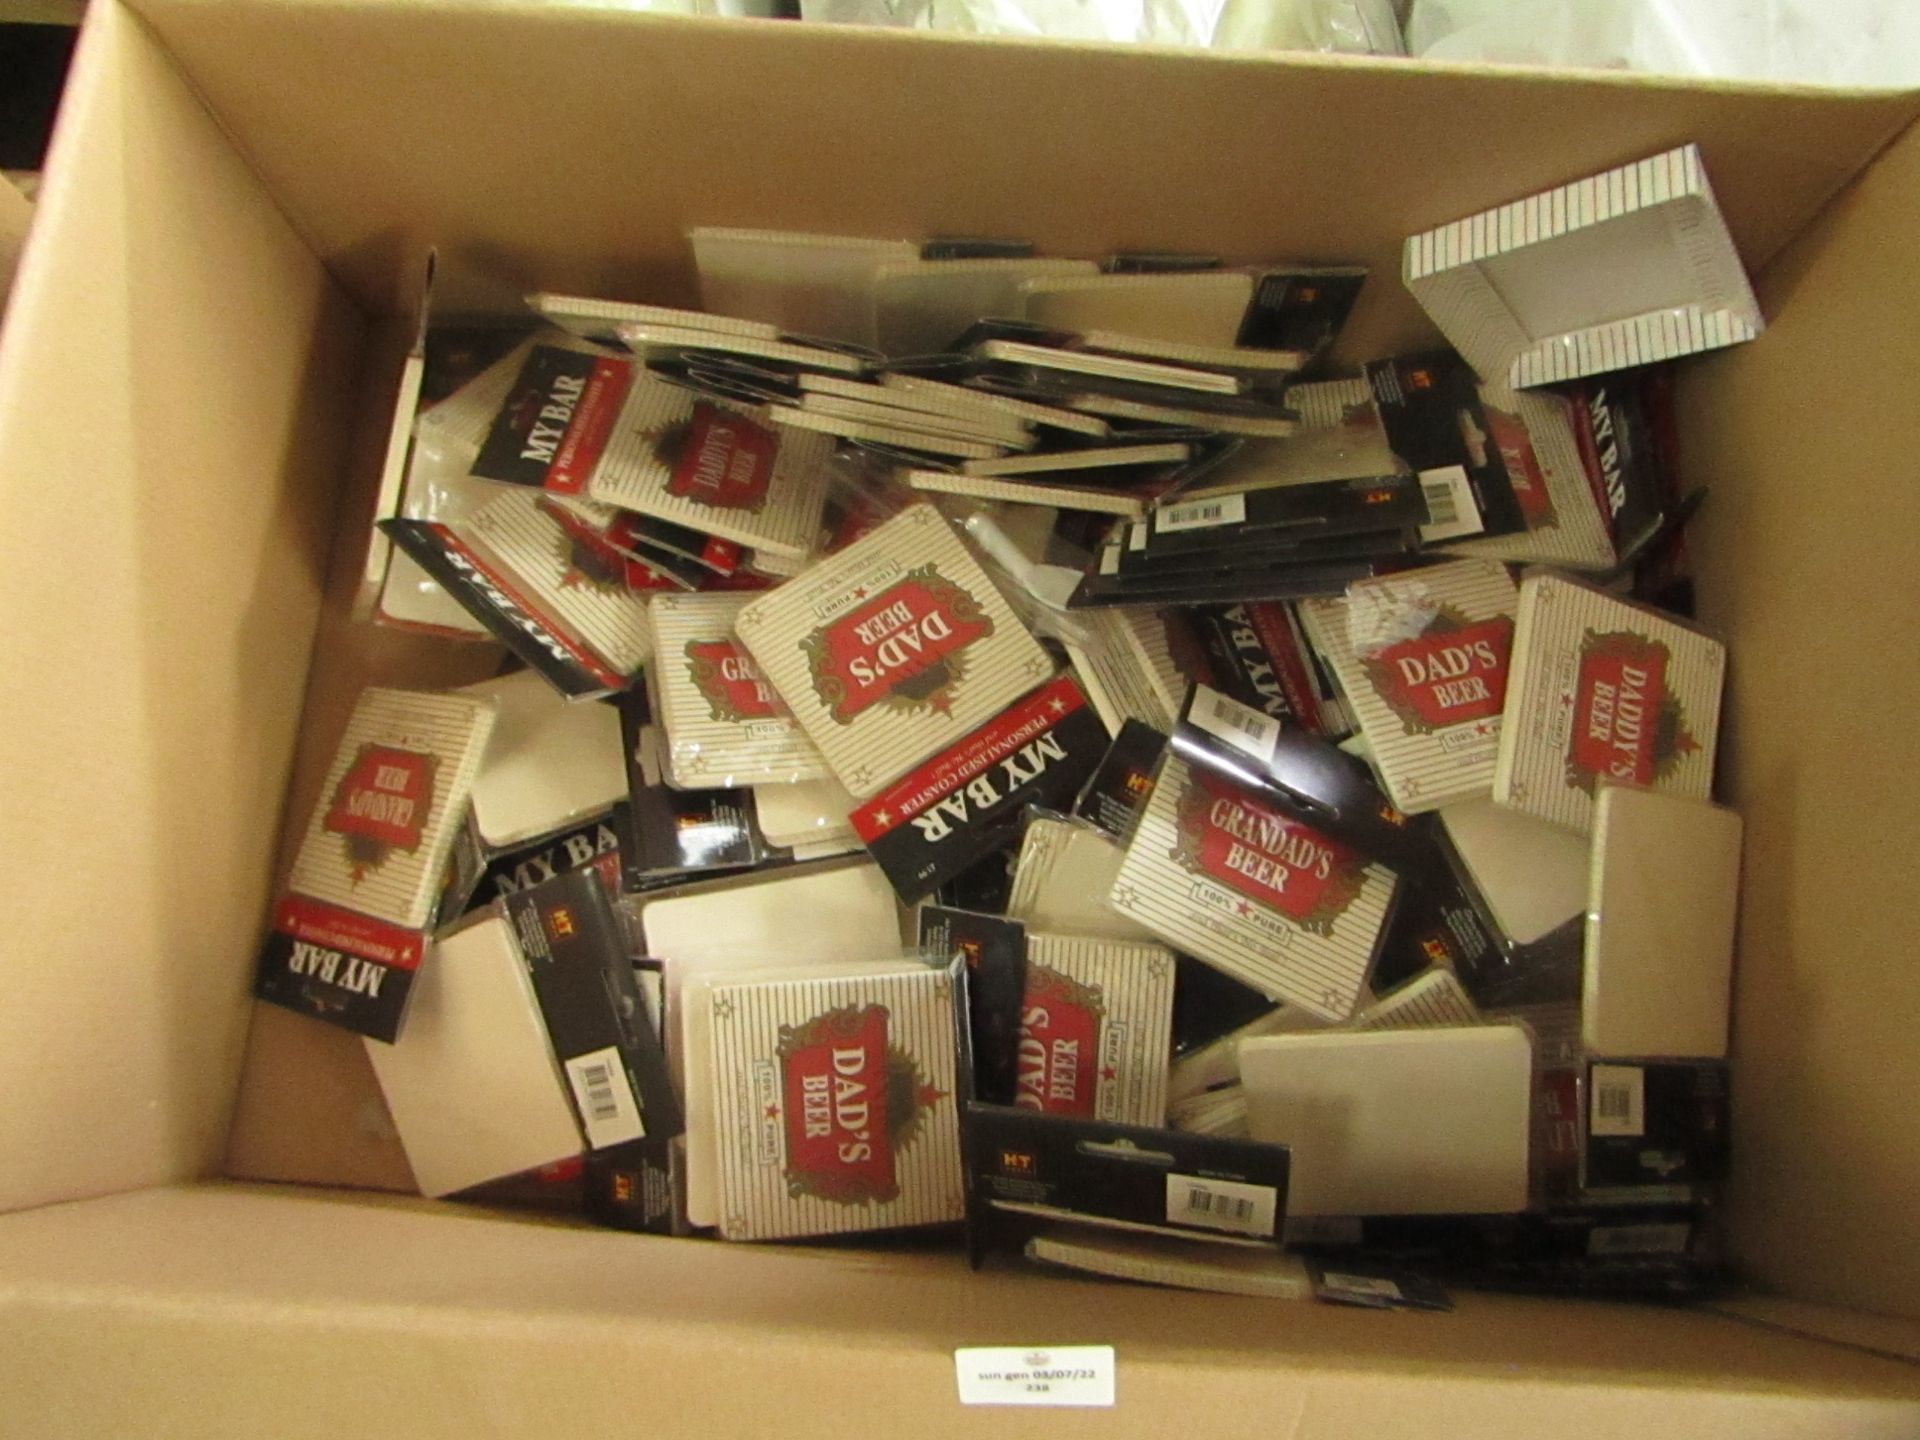 1x Box Containing Approx 50+ MyBar - " Dad's Beer " Personalised Coaster Sets - Unused & Packaged.